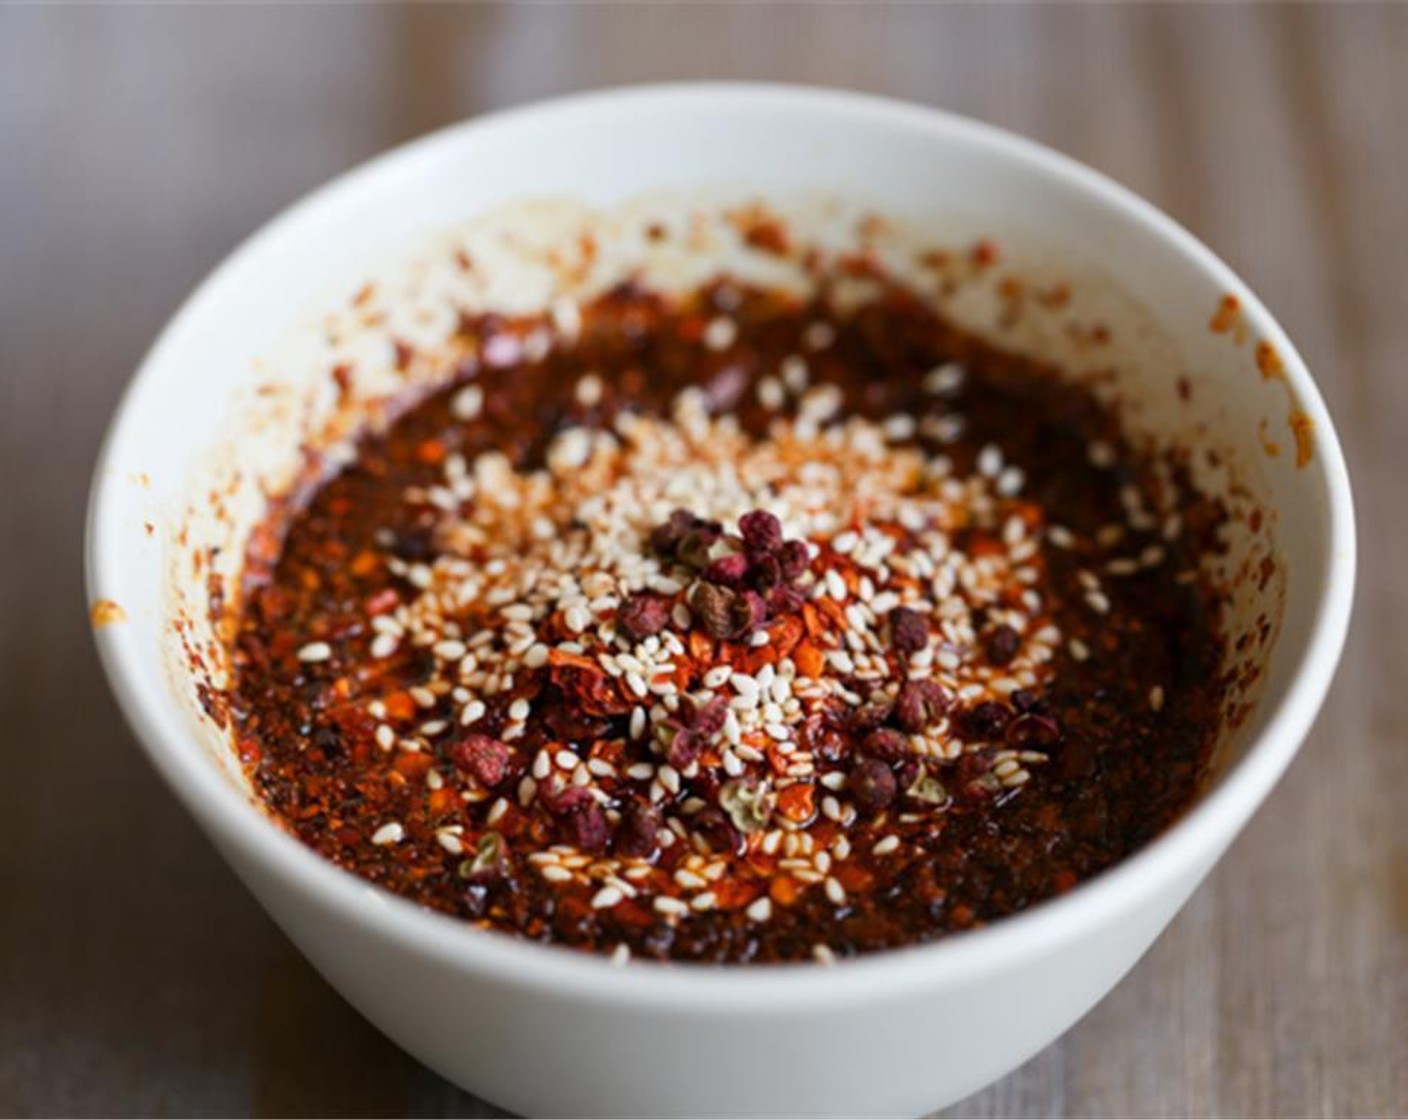 step 5 Add another 2 tablespoons of Red Chili Powder (2 Tbsp), Toasted White Sesame Seeds (1 Tbsp), and Sichuan Peppercorns (1/4 tsp) in the bowl.